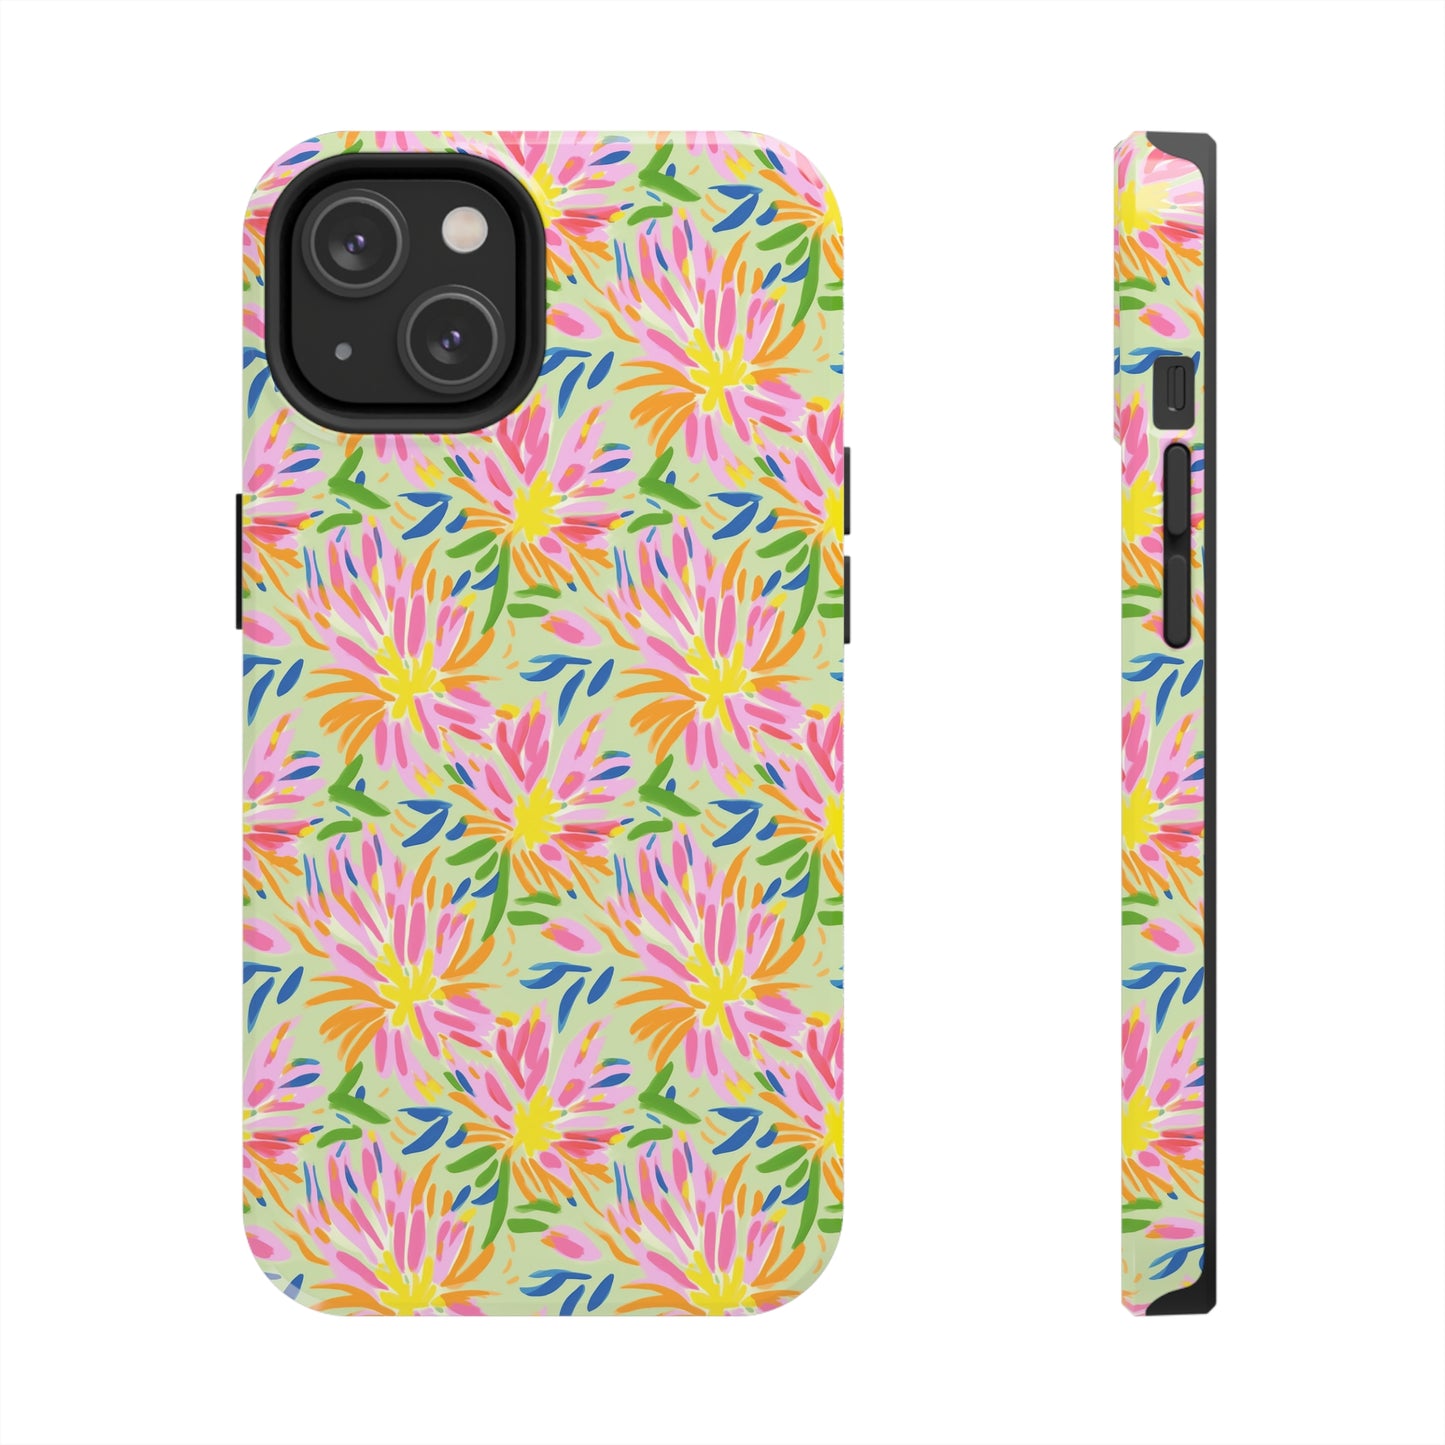 Blossoms in Bloom: Watercolor Pink and Yellow Flower Bursts Design Iphone Tough Phone Case